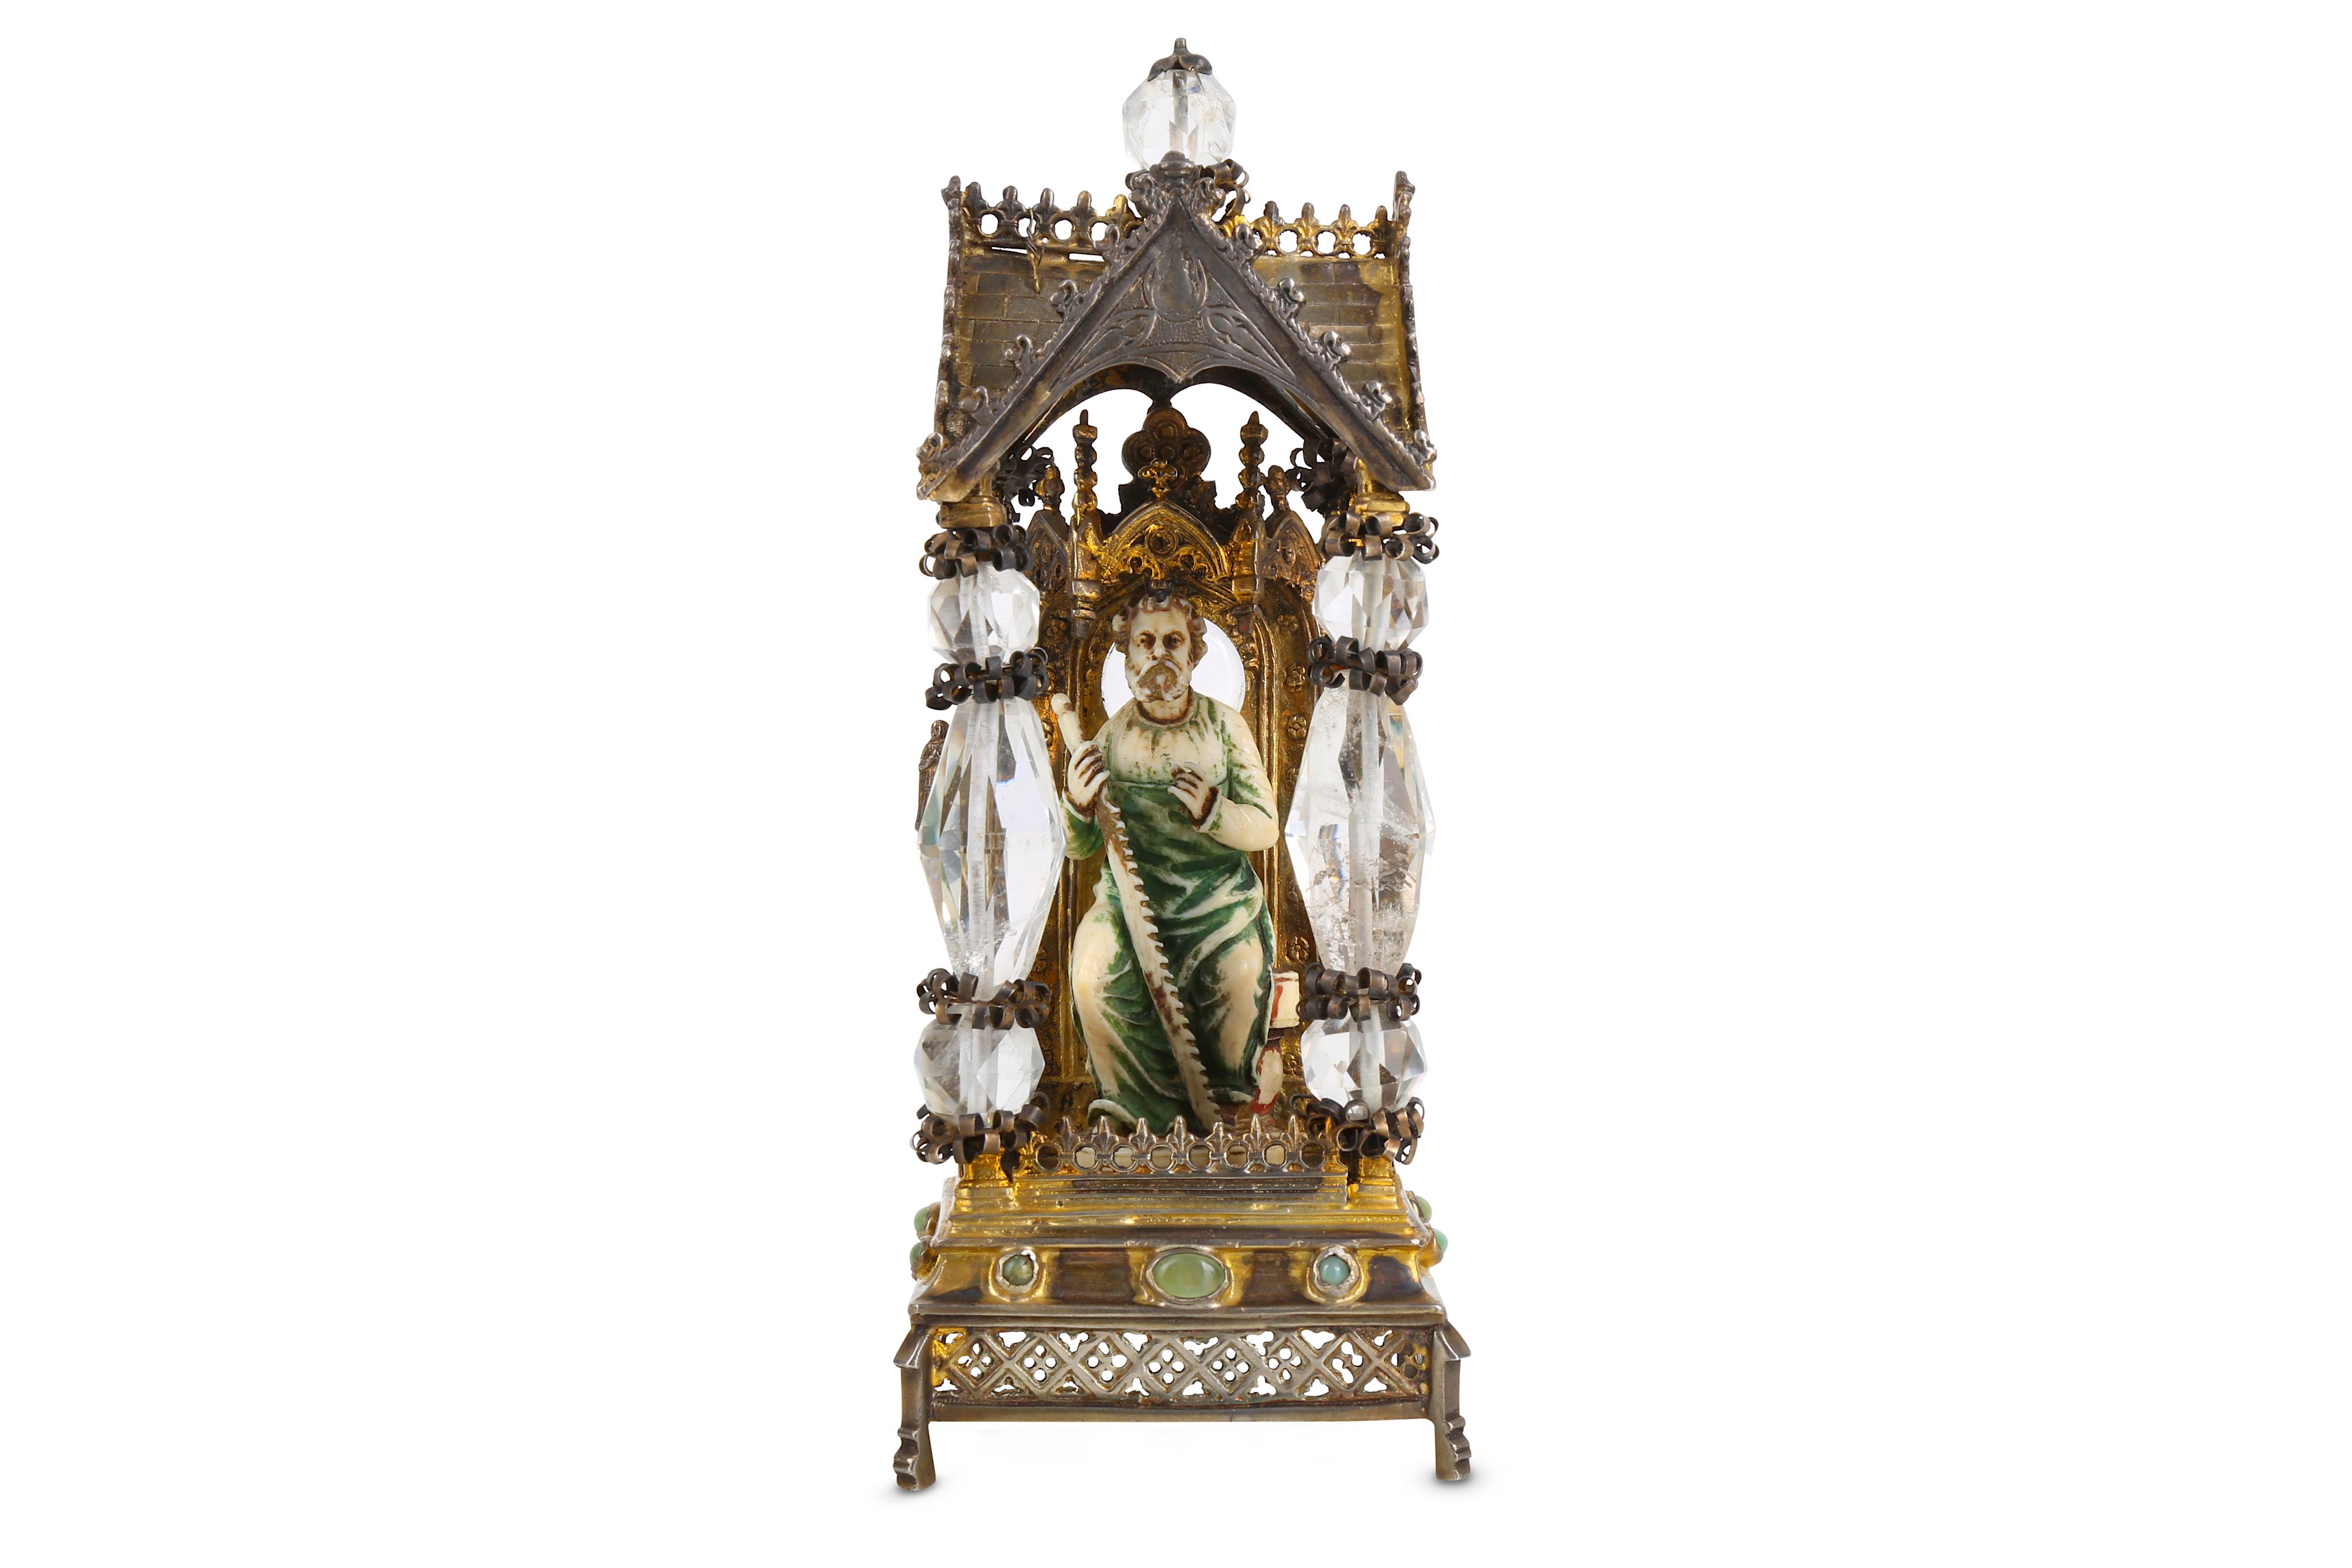 A 19TH CENTURY SILVER GILT, ROCK CRYSTAL AND IVORY RELIQUARY OF SAINT SIMON THE ZEALOT - Image 2 of 4